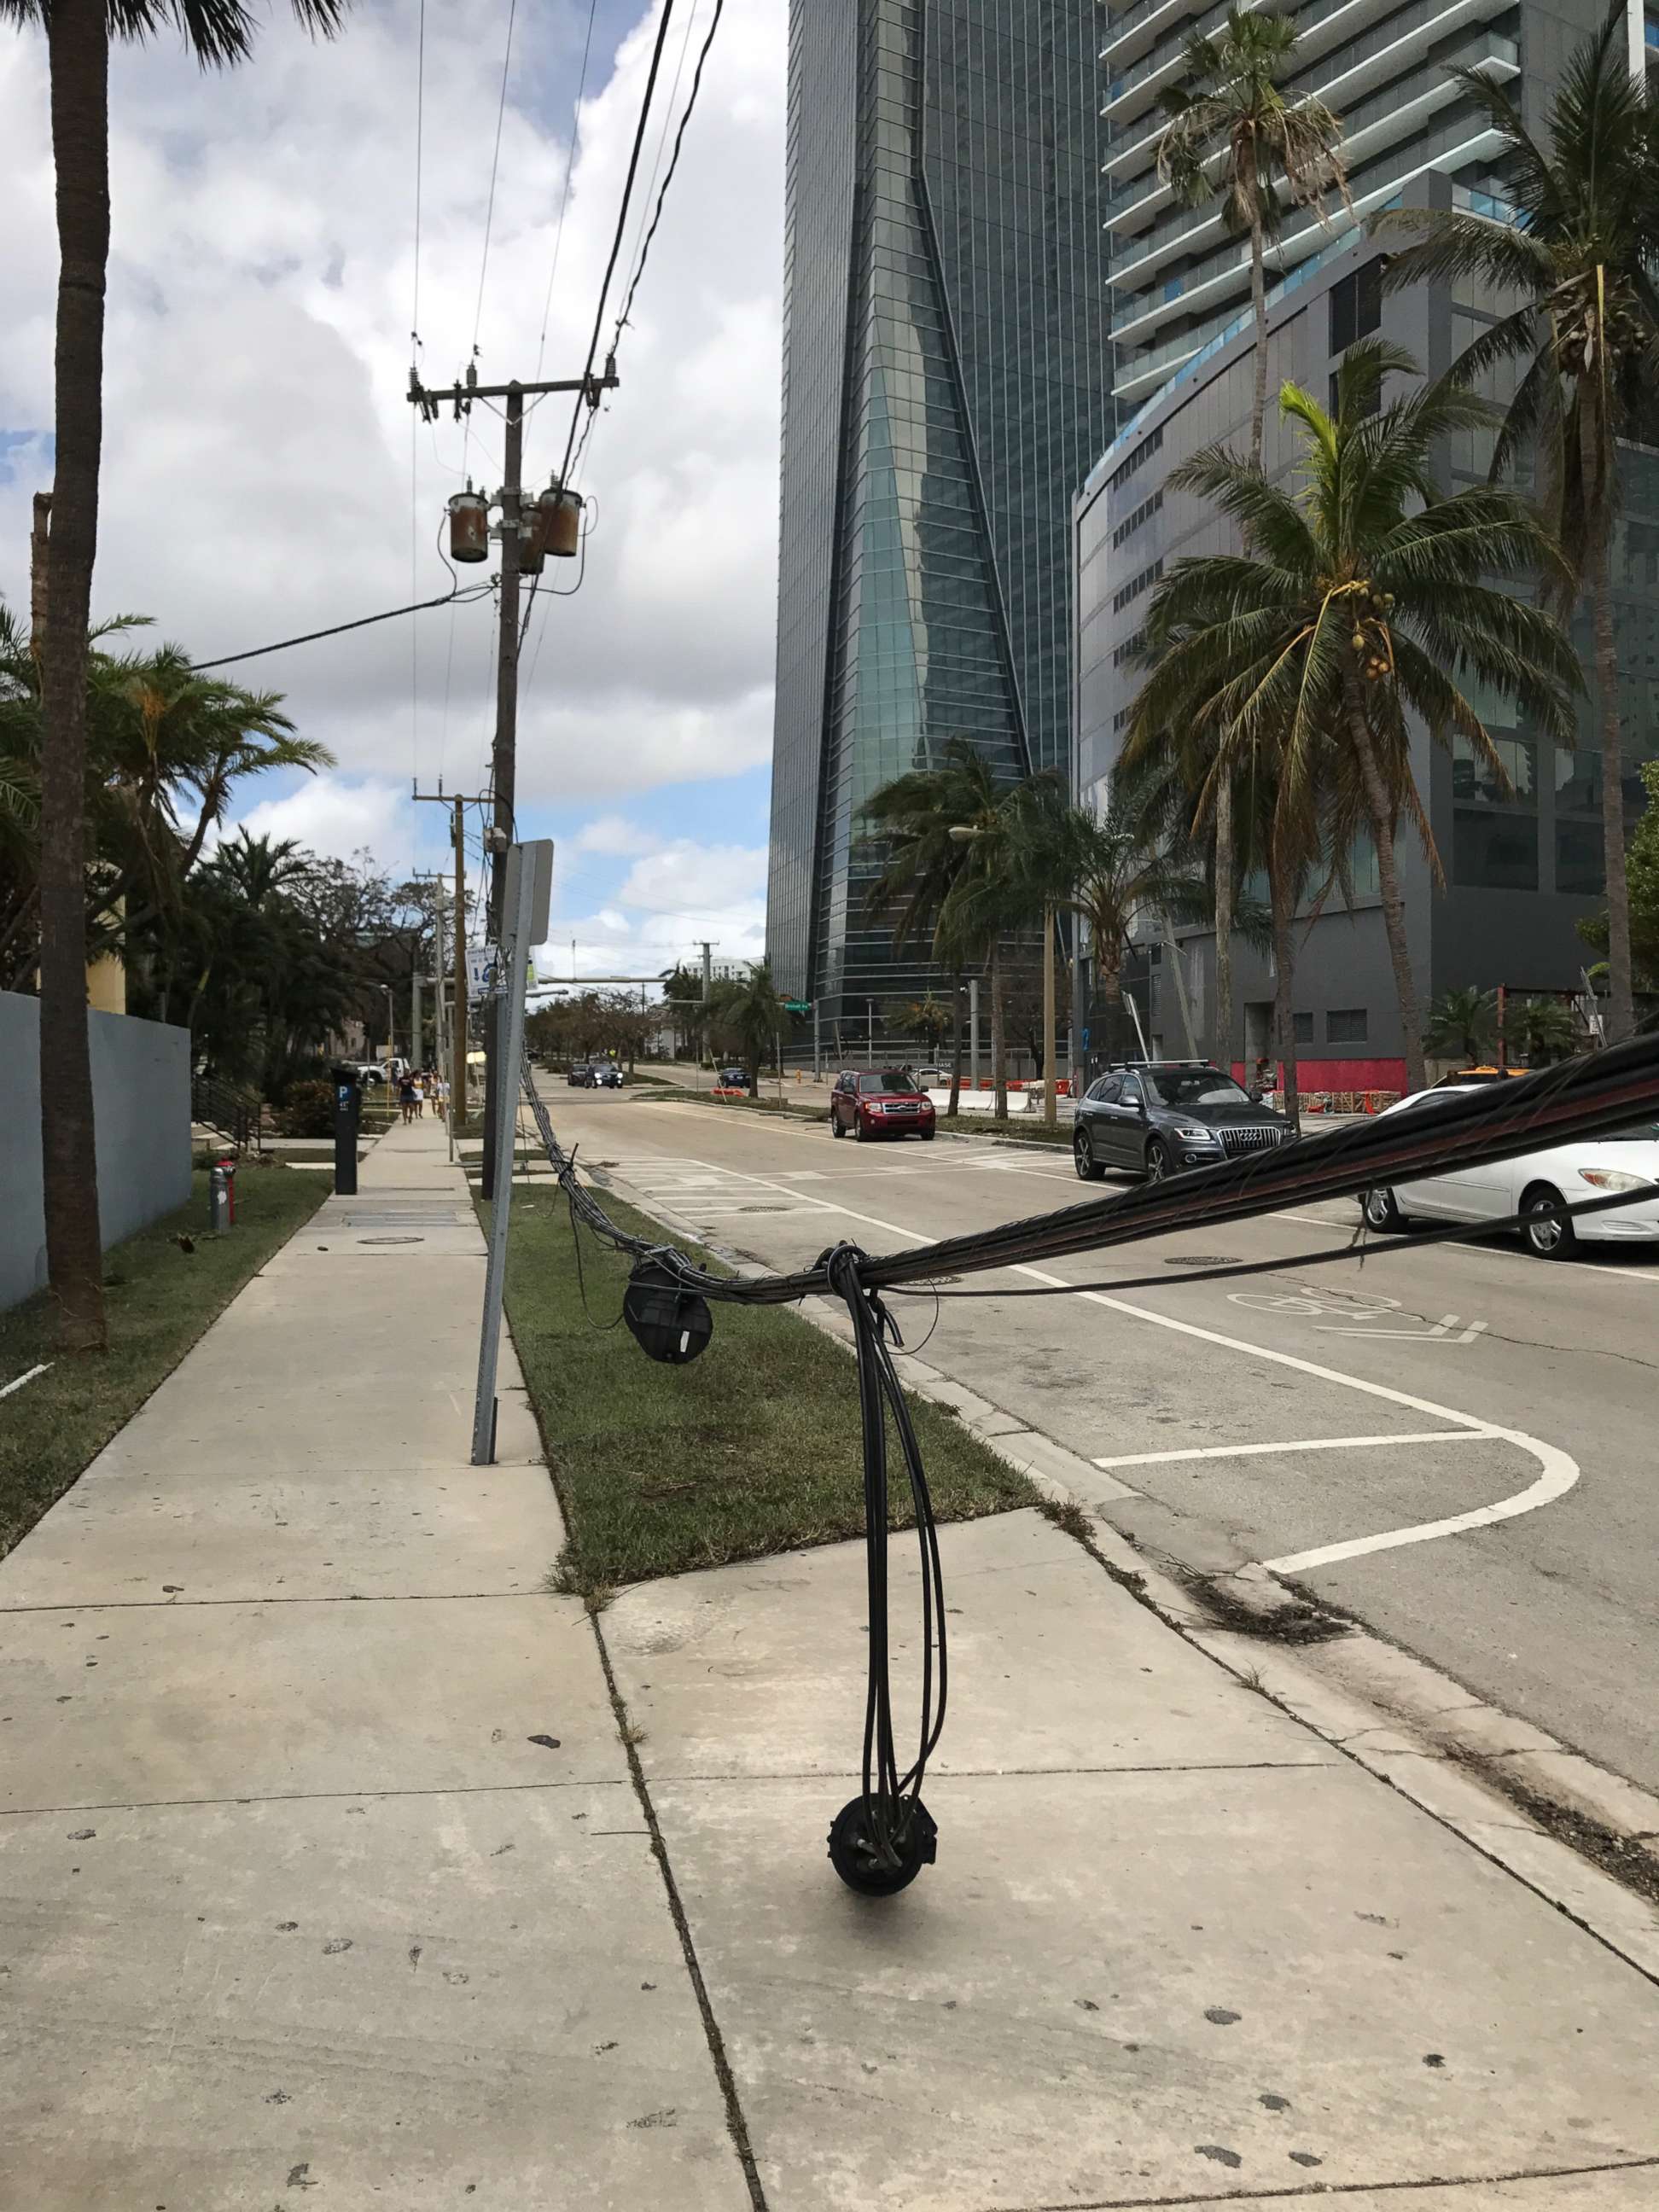 PHOTO: Power lines are down in the streets of Miami in the wake of Hurricane Irma, Sept. 11, 2017.